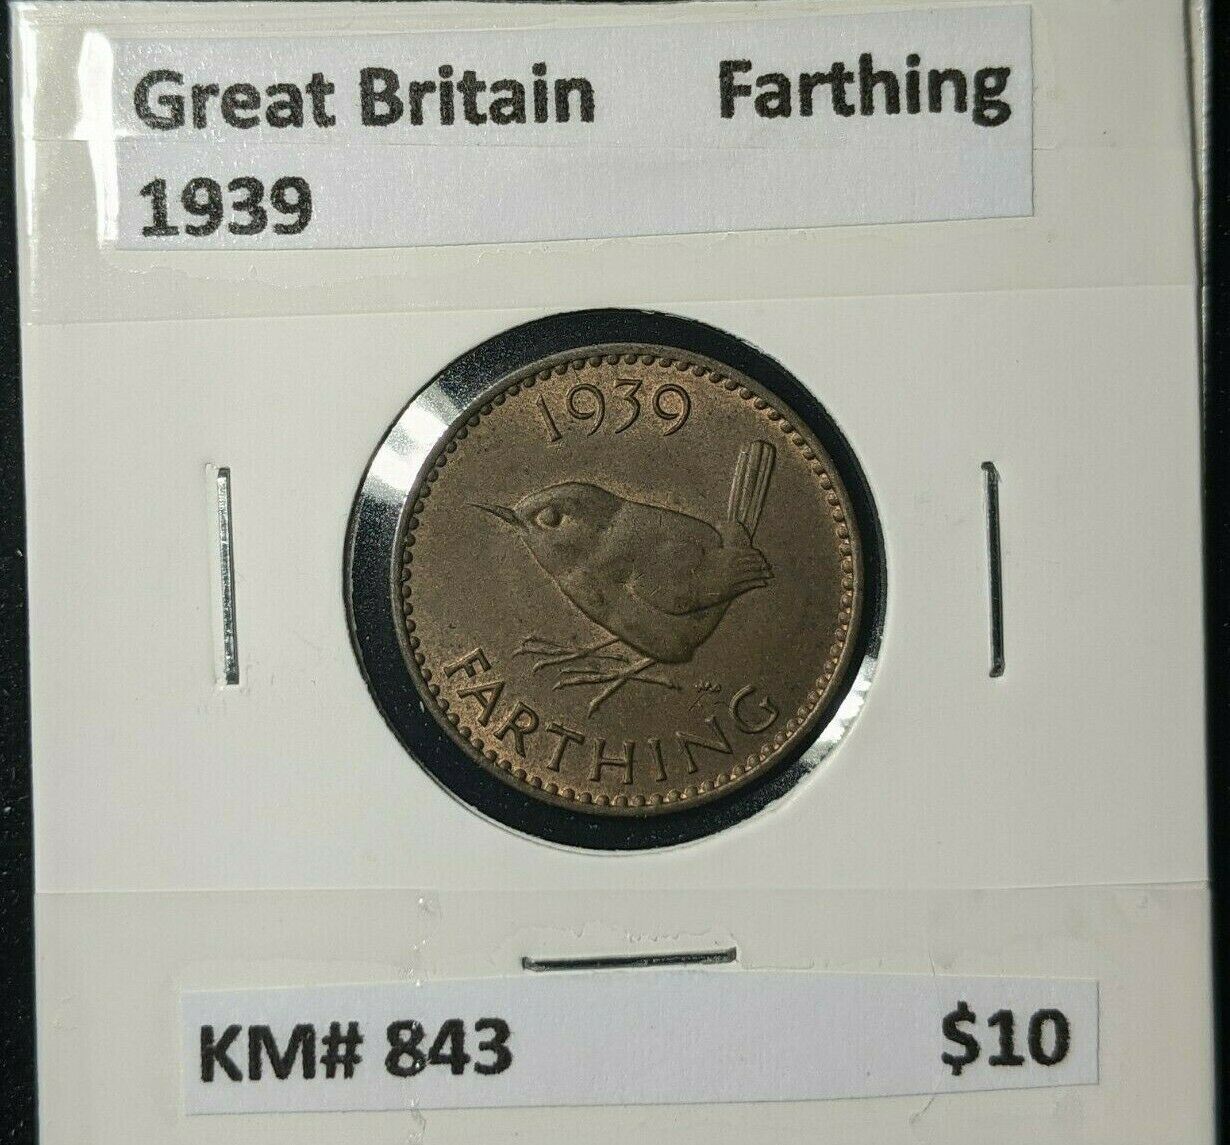 Great Britain 1939 1/4d Farthing KM# 843 #082